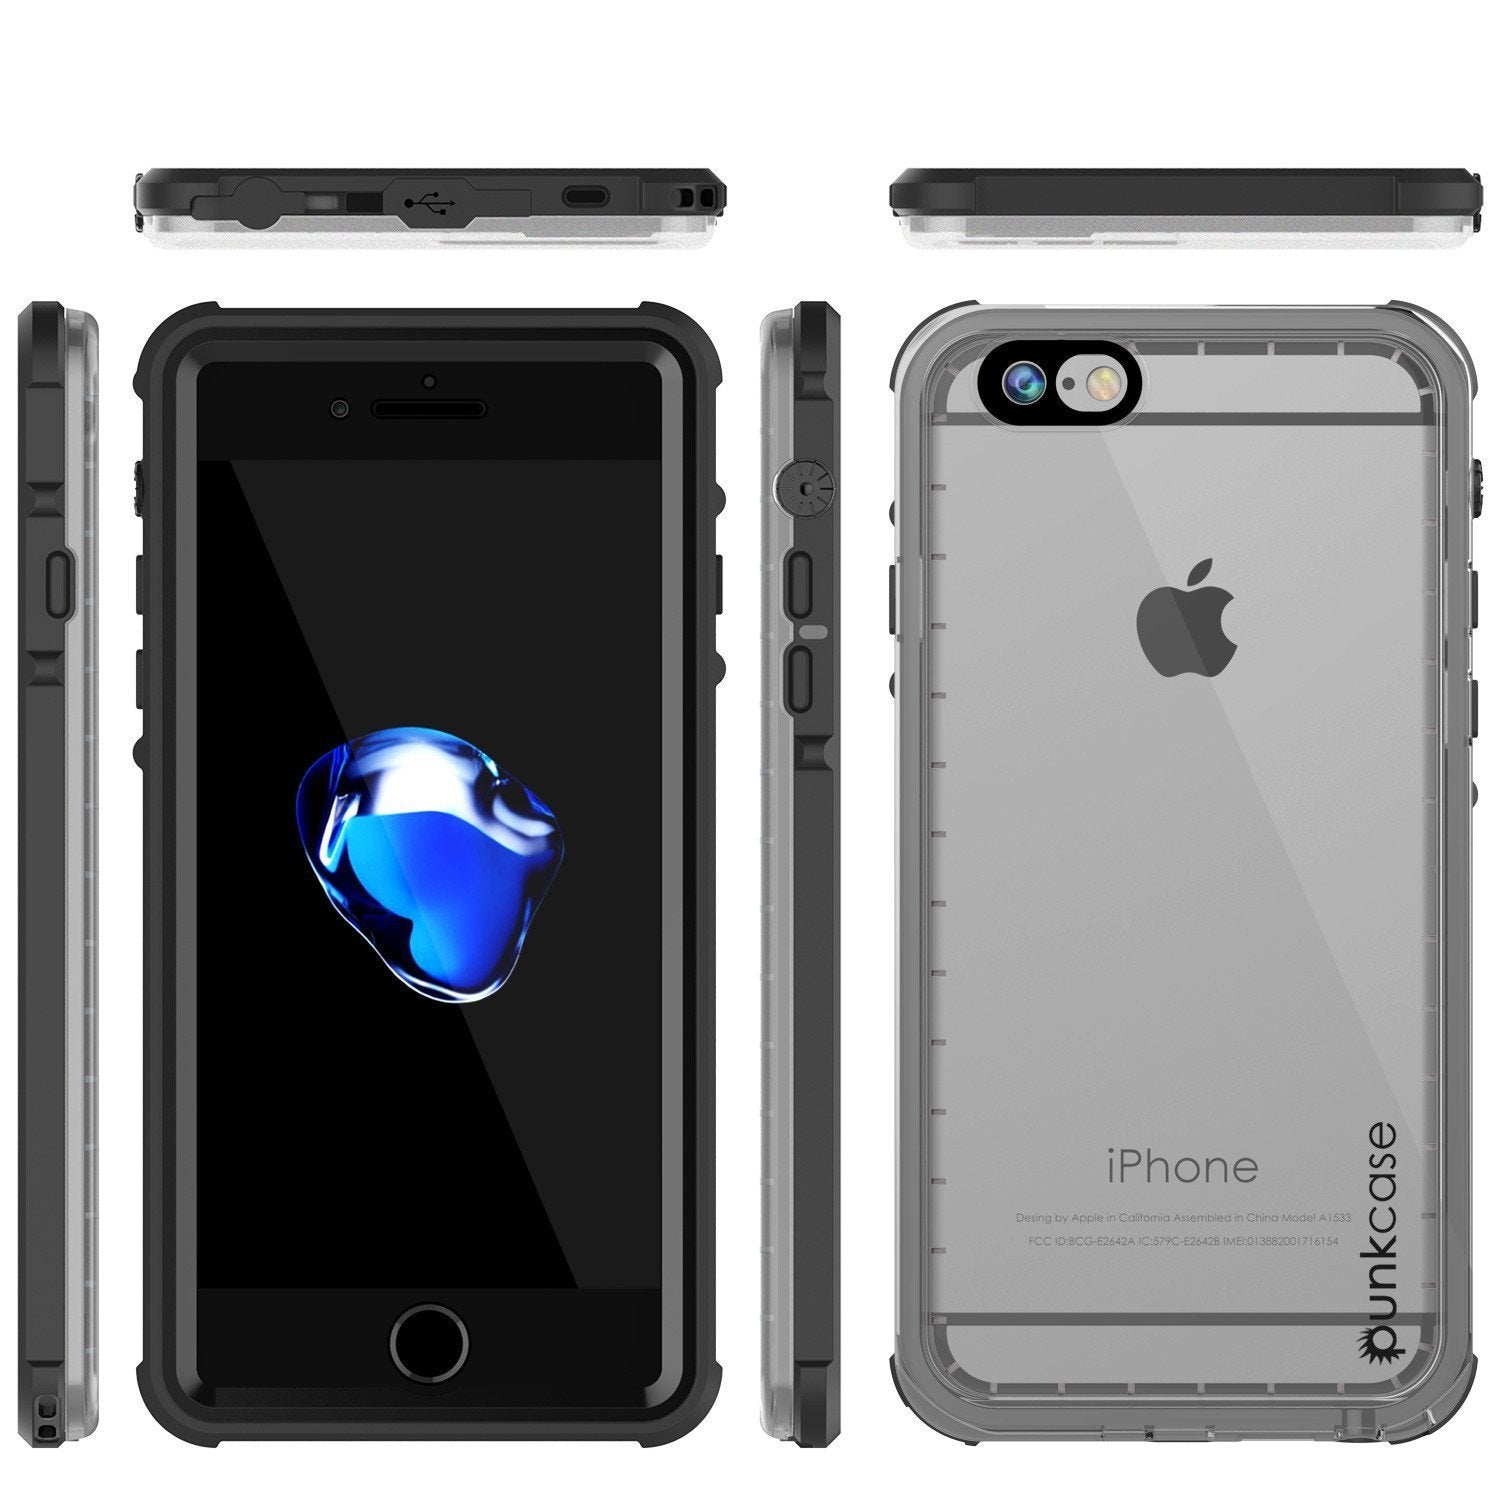 Apple iPhone SE (4.7") Waterproof Case, PUNKcase CRYSTAL Black W/ Attached Screen Protector  | Warranty (Color in image: Black)